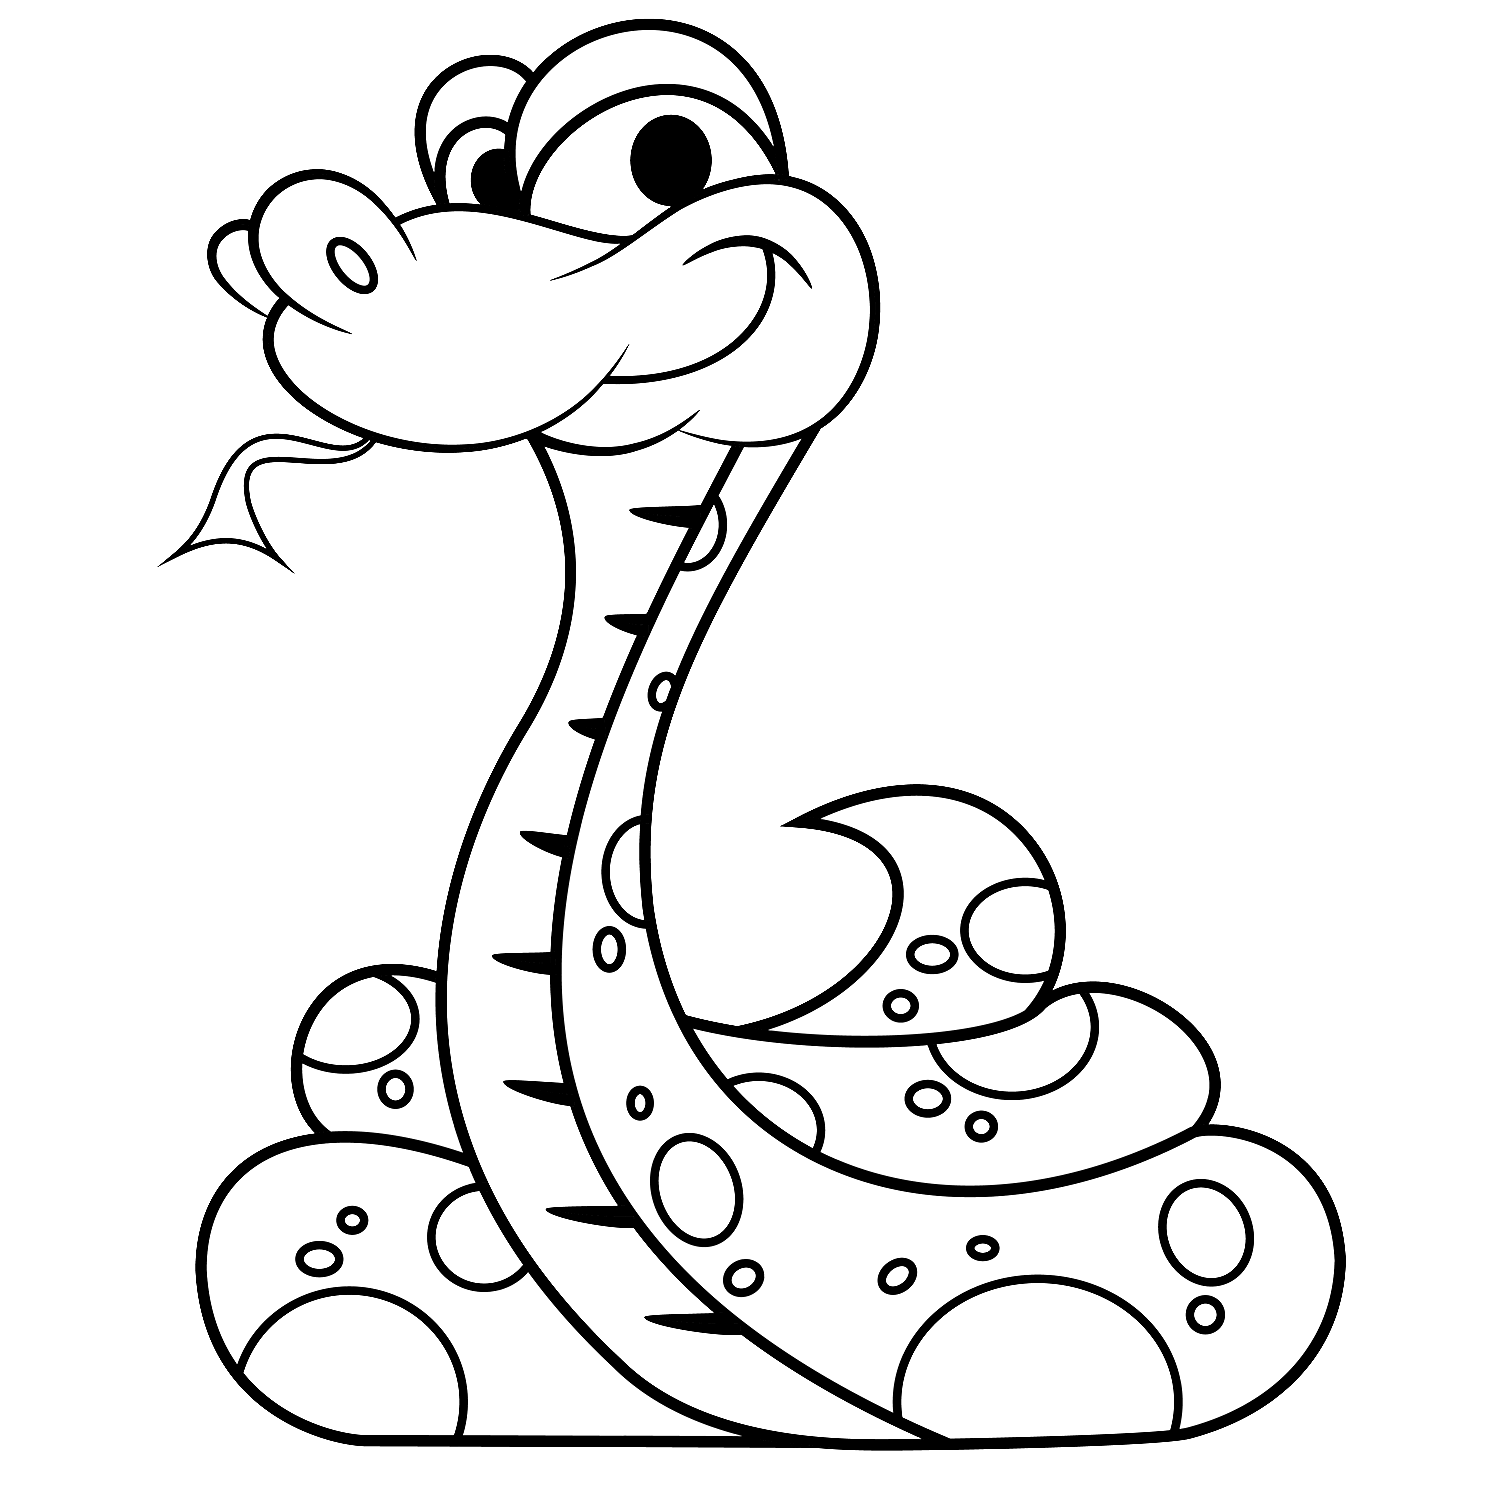 Snake black and white snake line drawing clipart